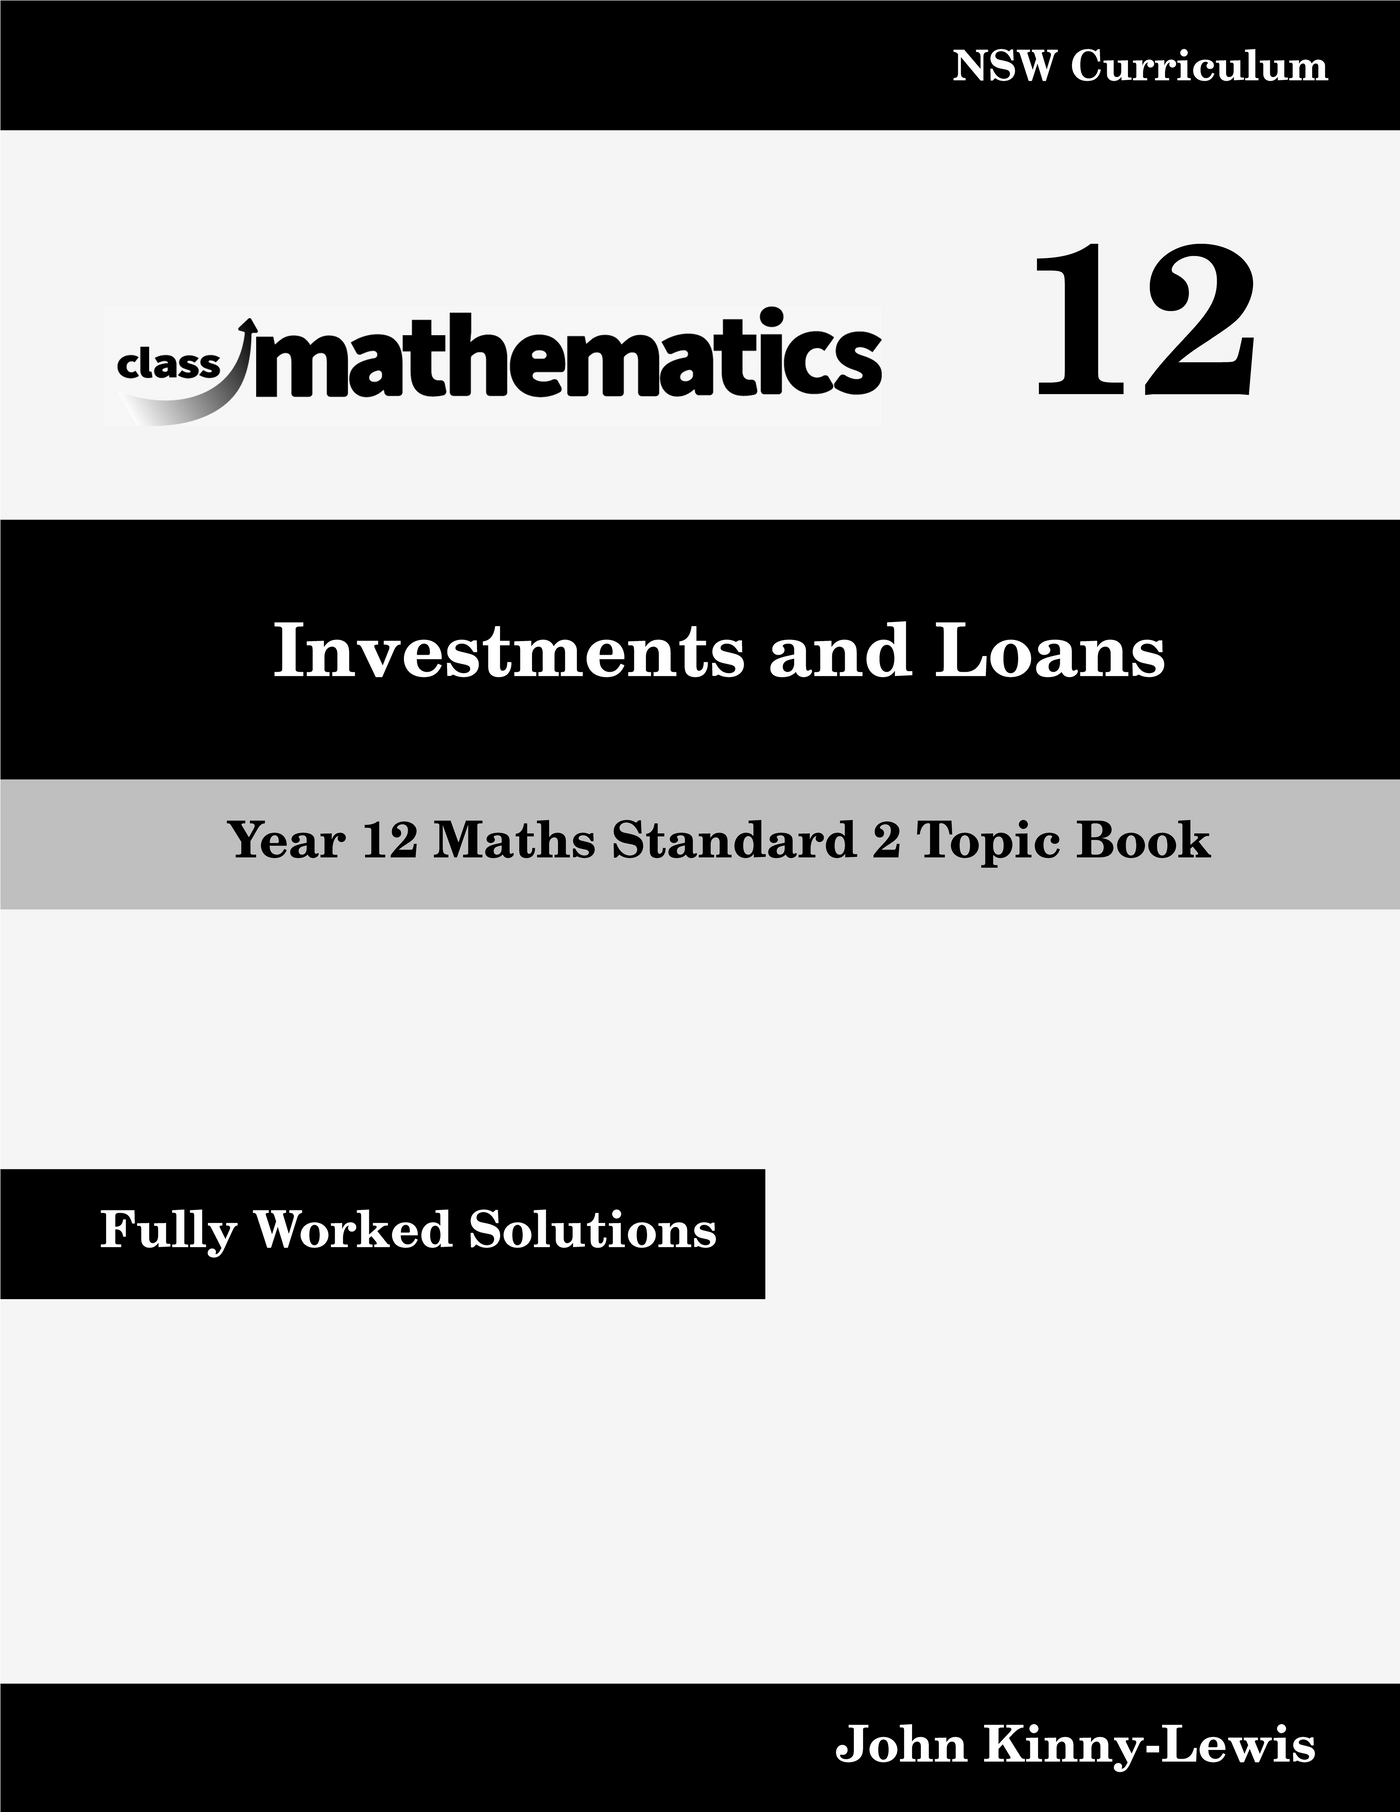 NSW Year 12 Maths Standard 2 - Investments and Loans